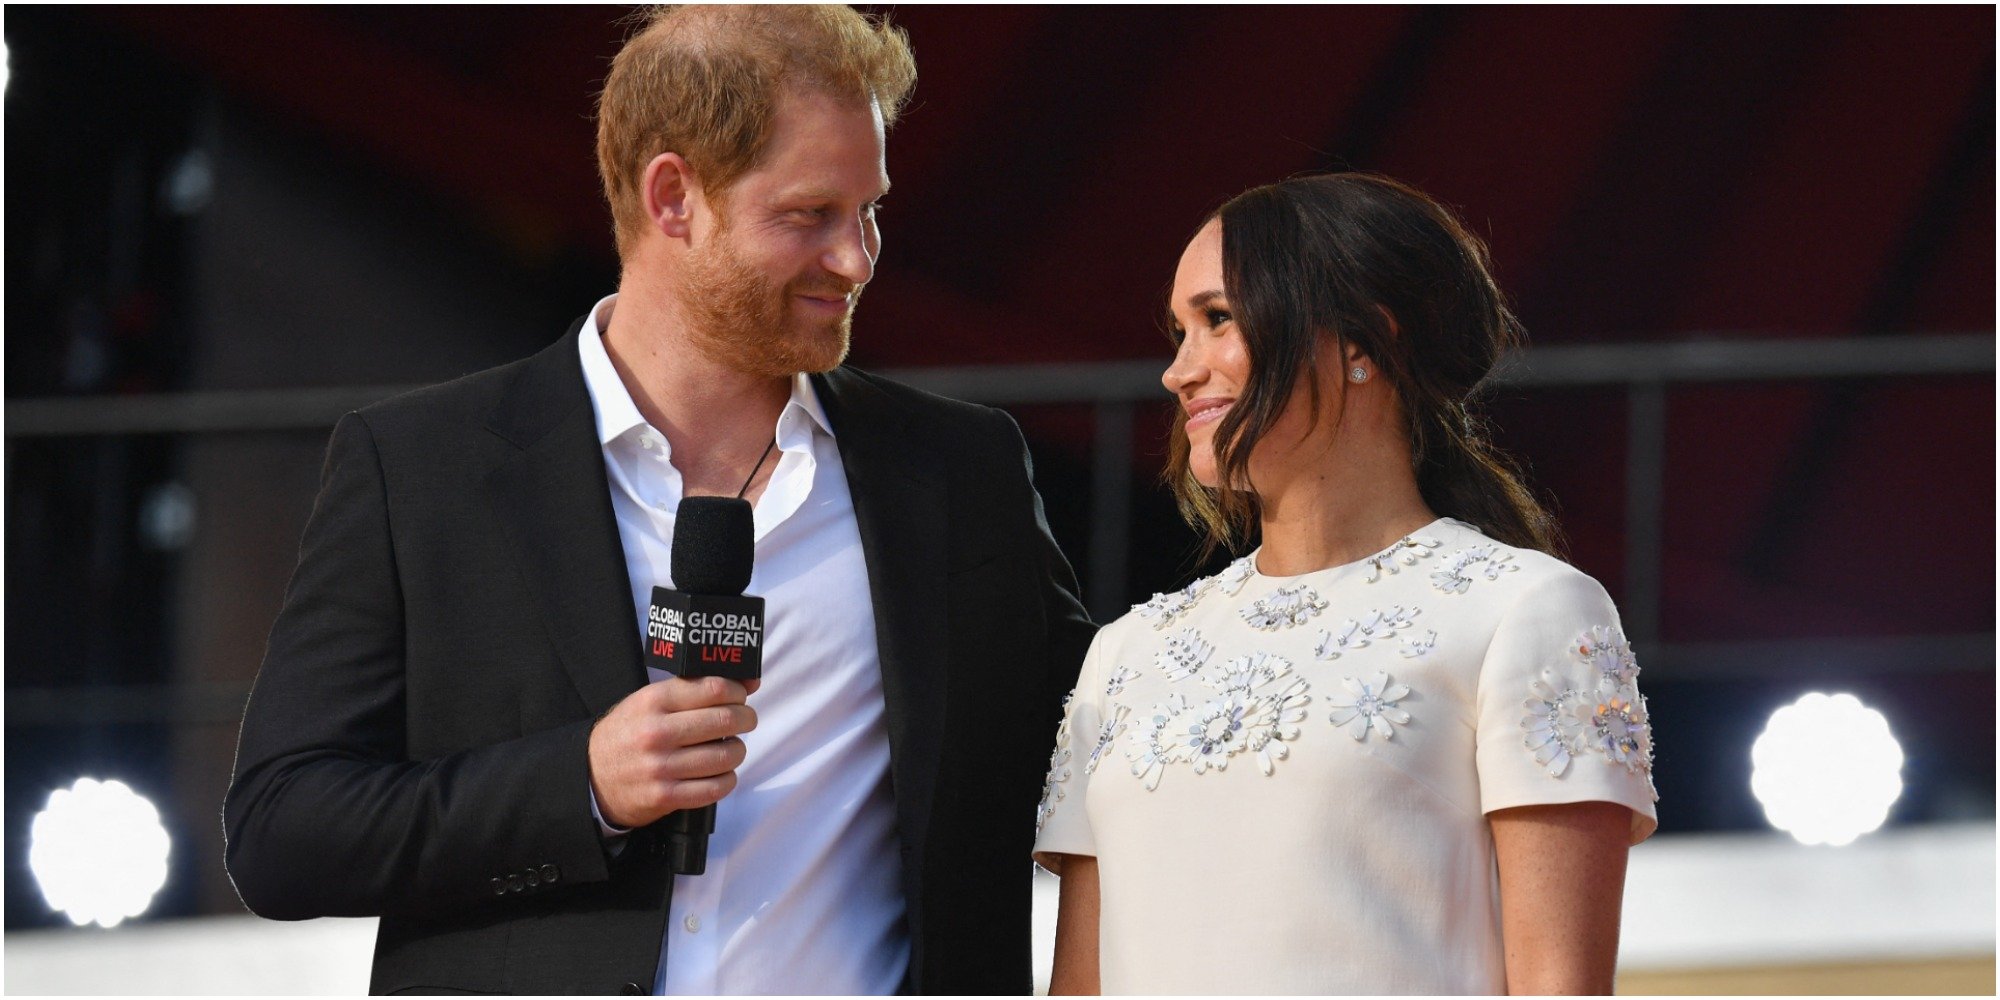 Prince Harry and Meghan Markle look at one another during the Global Citizen Live event in New York City.